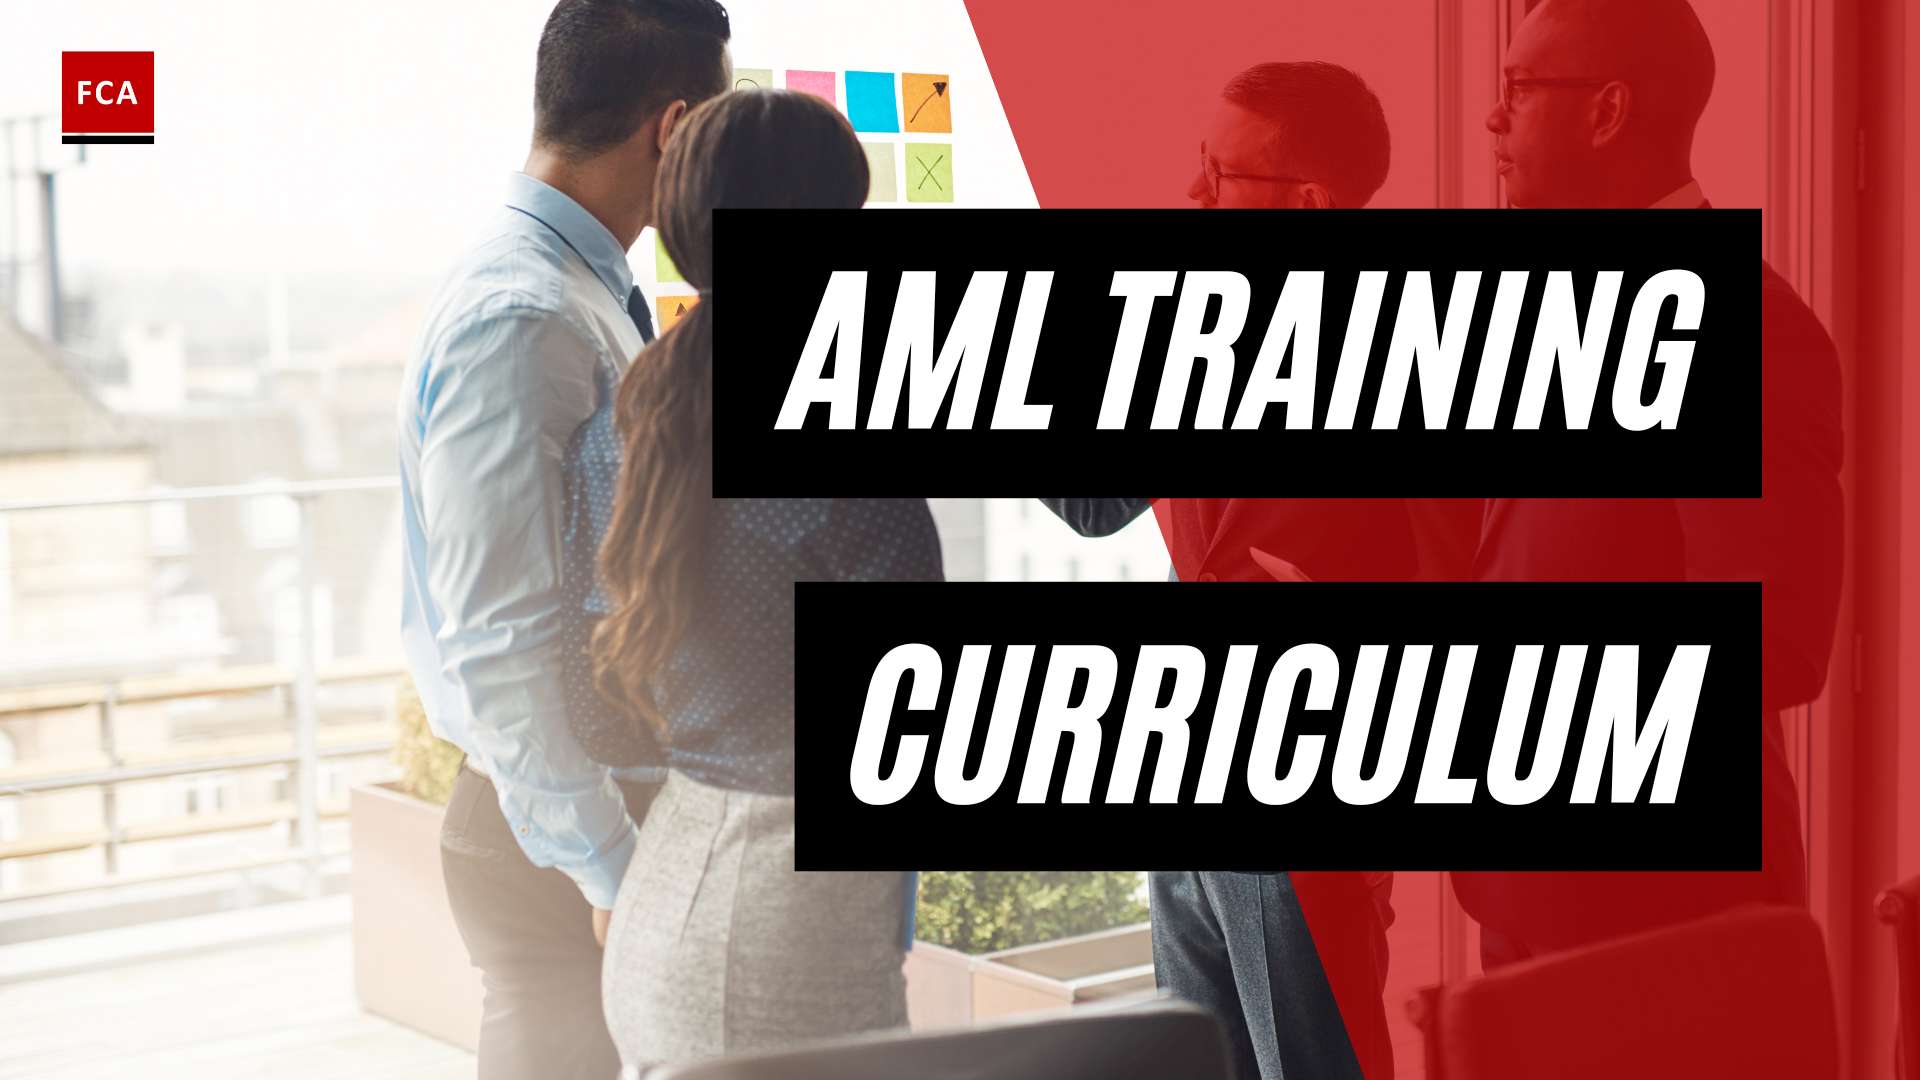 Taking A Proactive Approach: Designing An Engaging Aml Training Curriculum